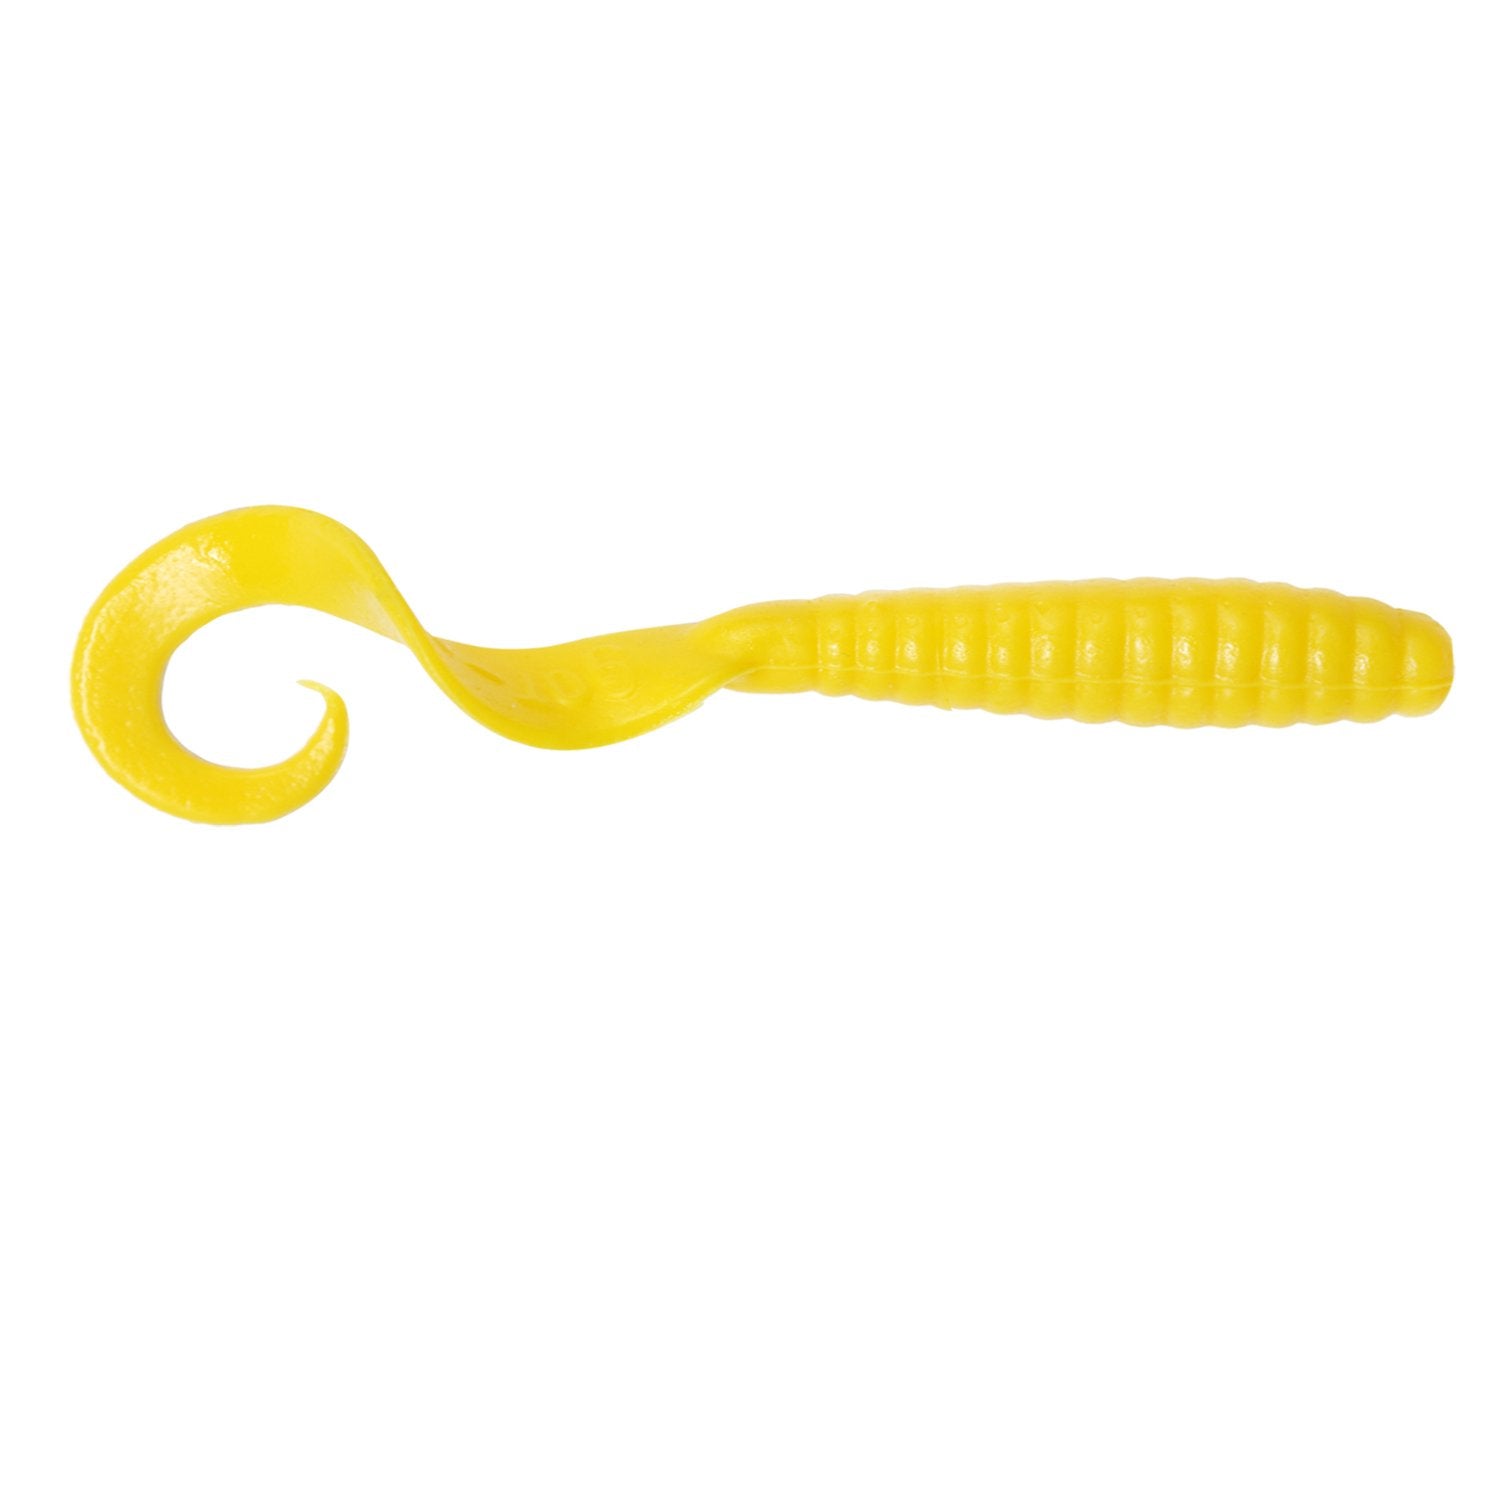 Got-Cha H6ct20-2 Curltail Grub, 6 inch Yellow, 20/Pack